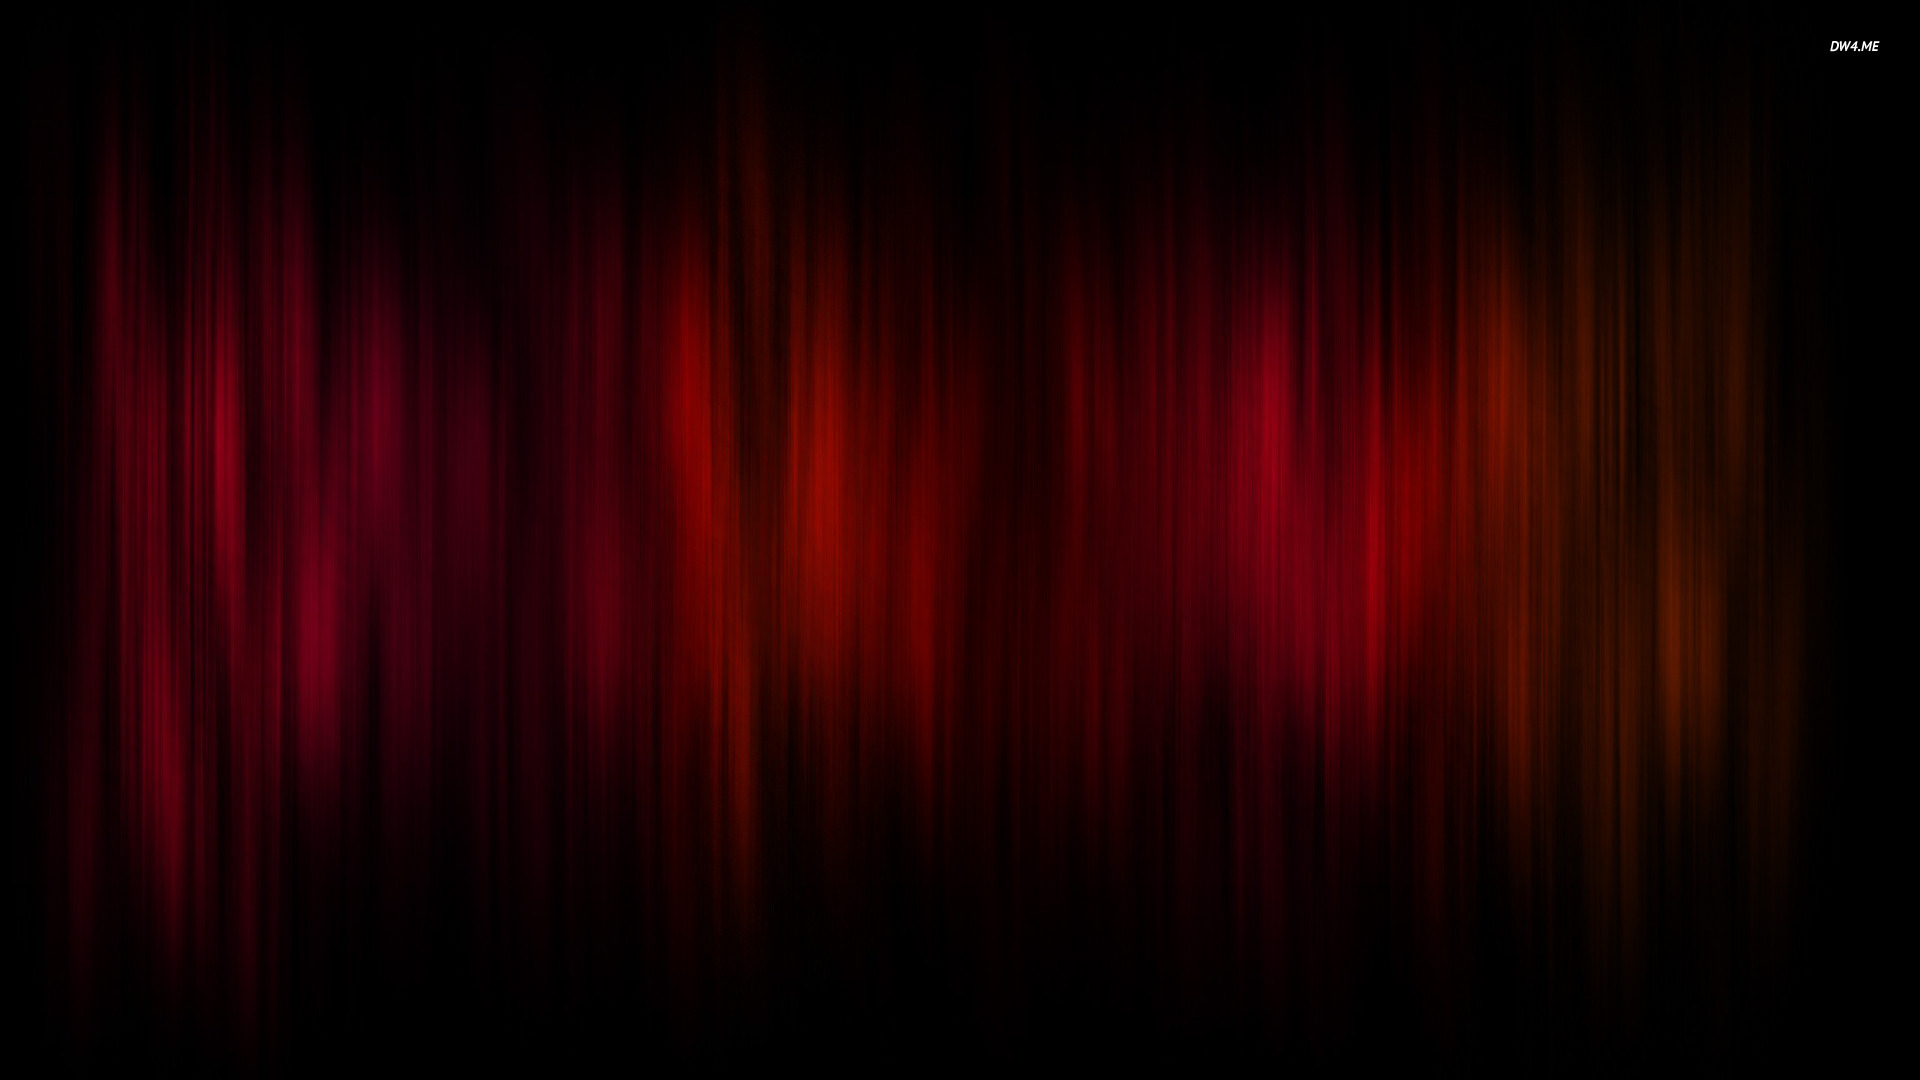 Hd Black And Red Image - HD Wallpaper 